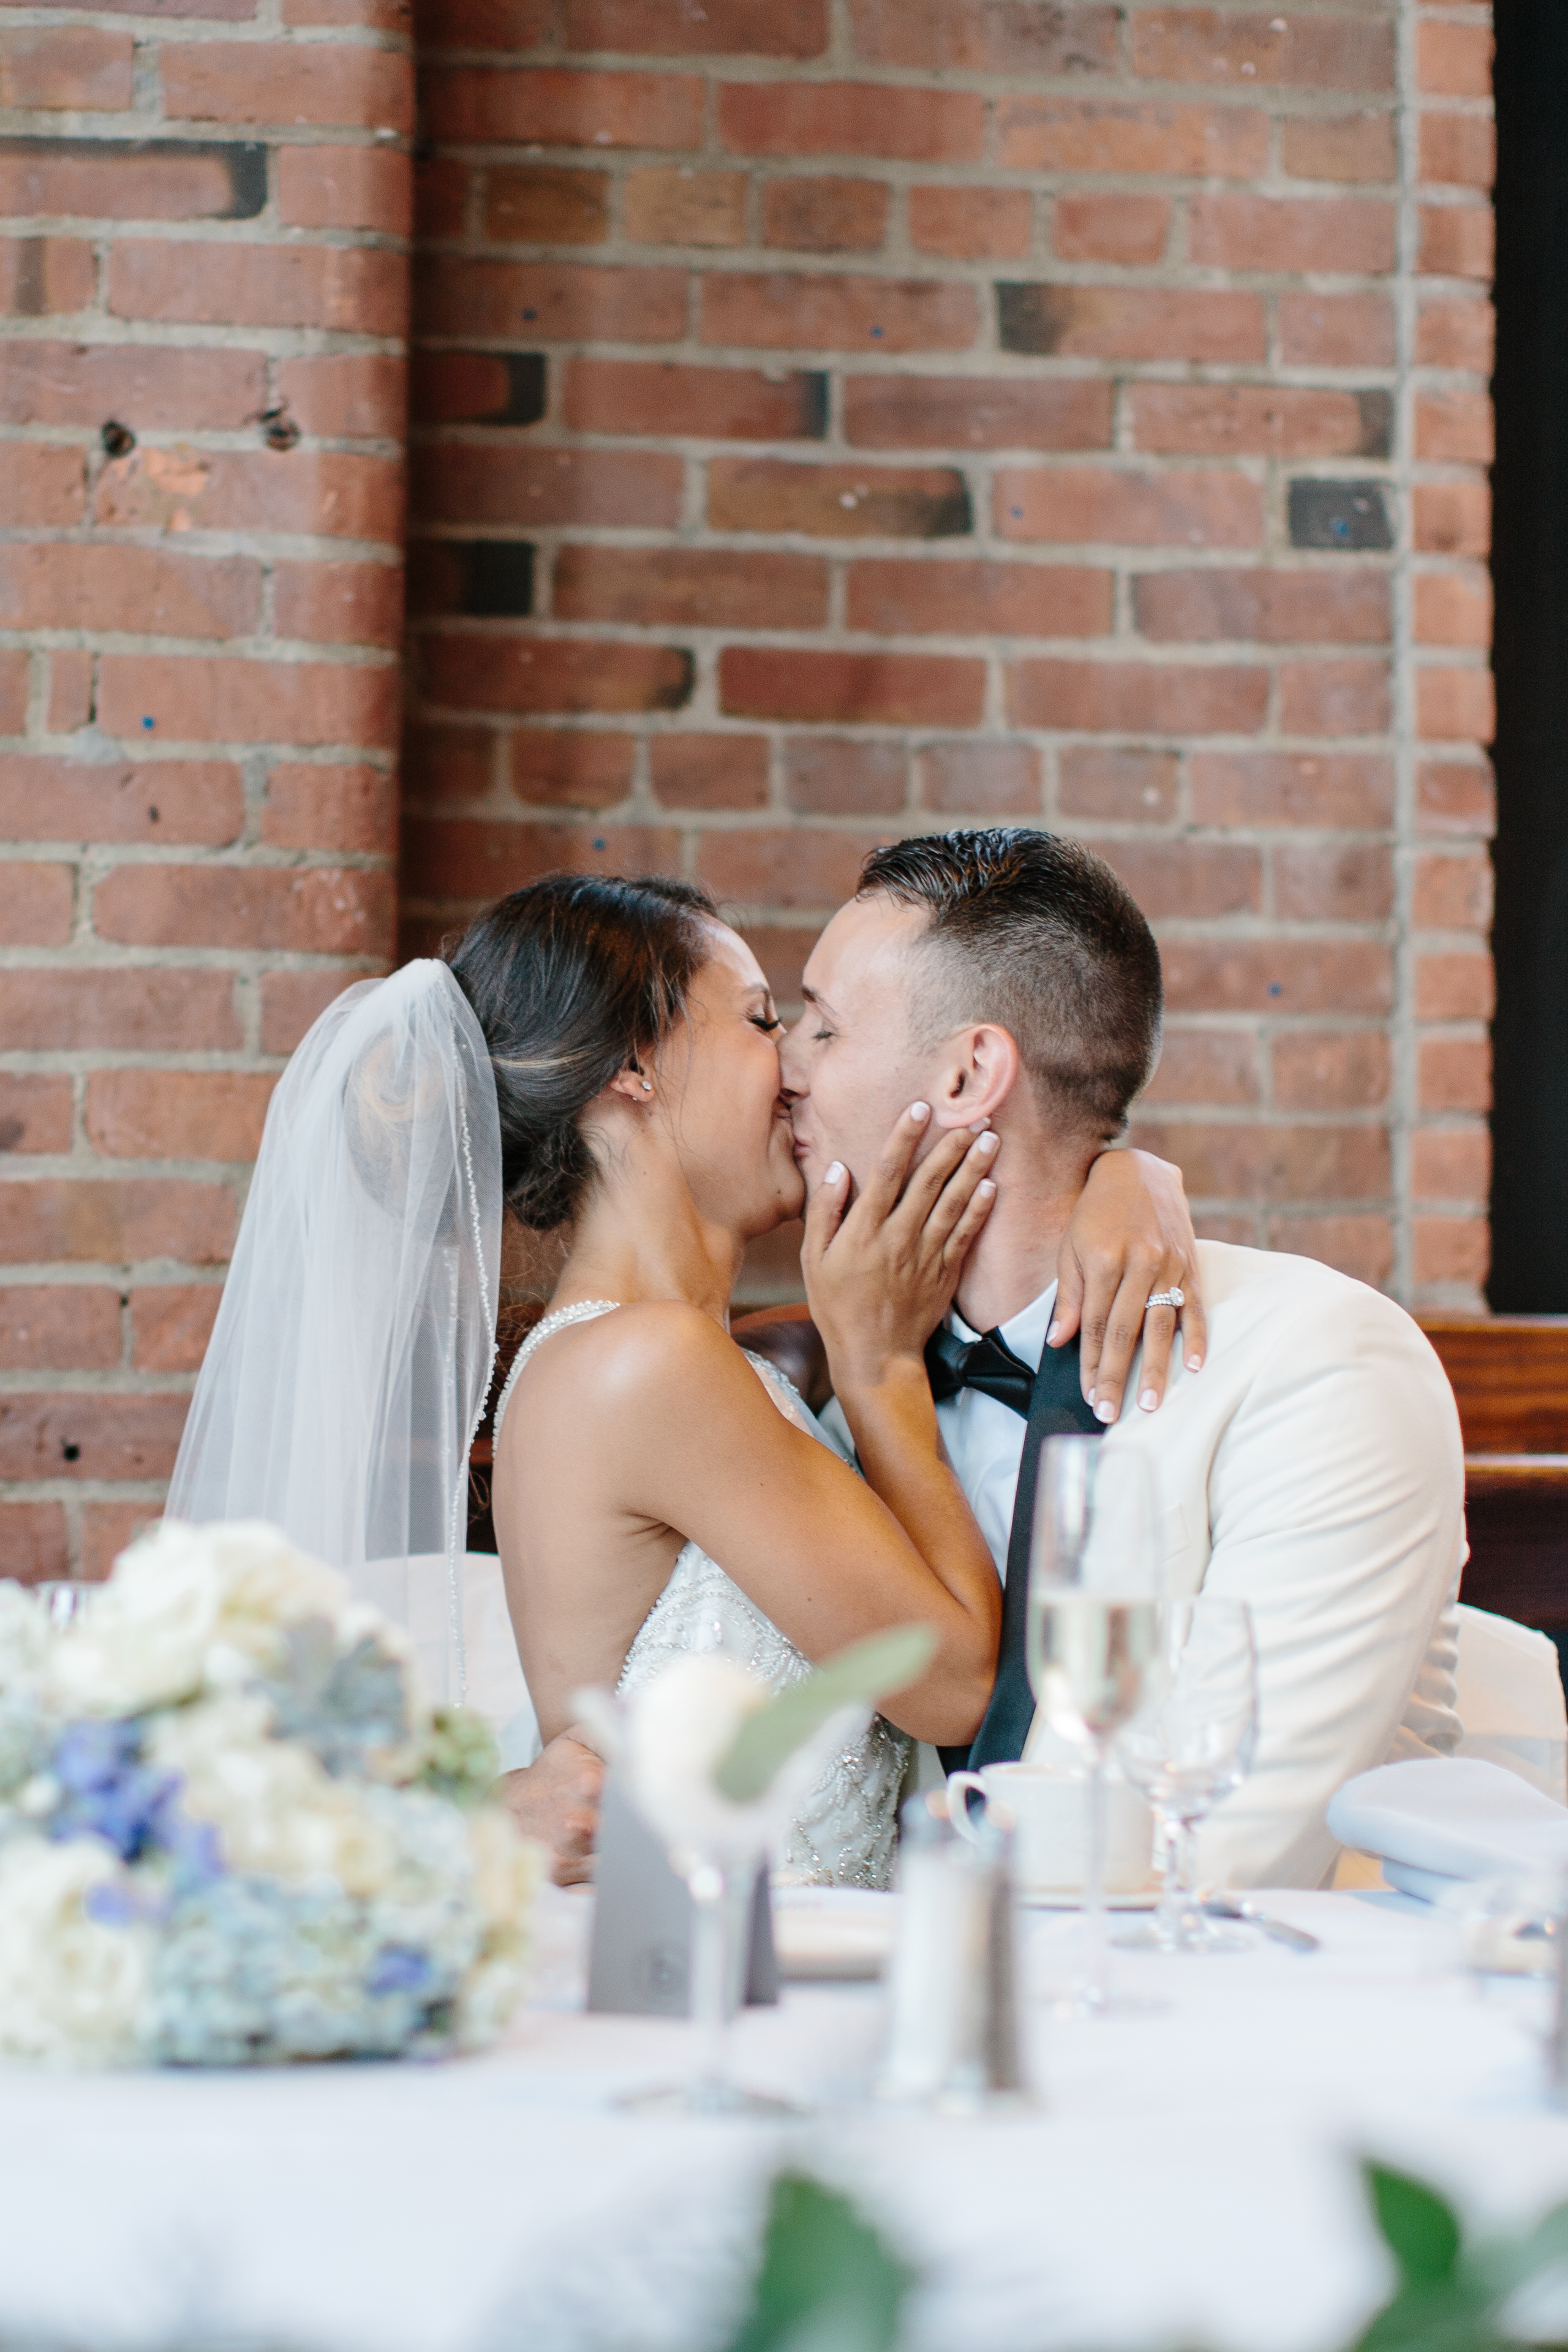 Bride and groom kiss during reception